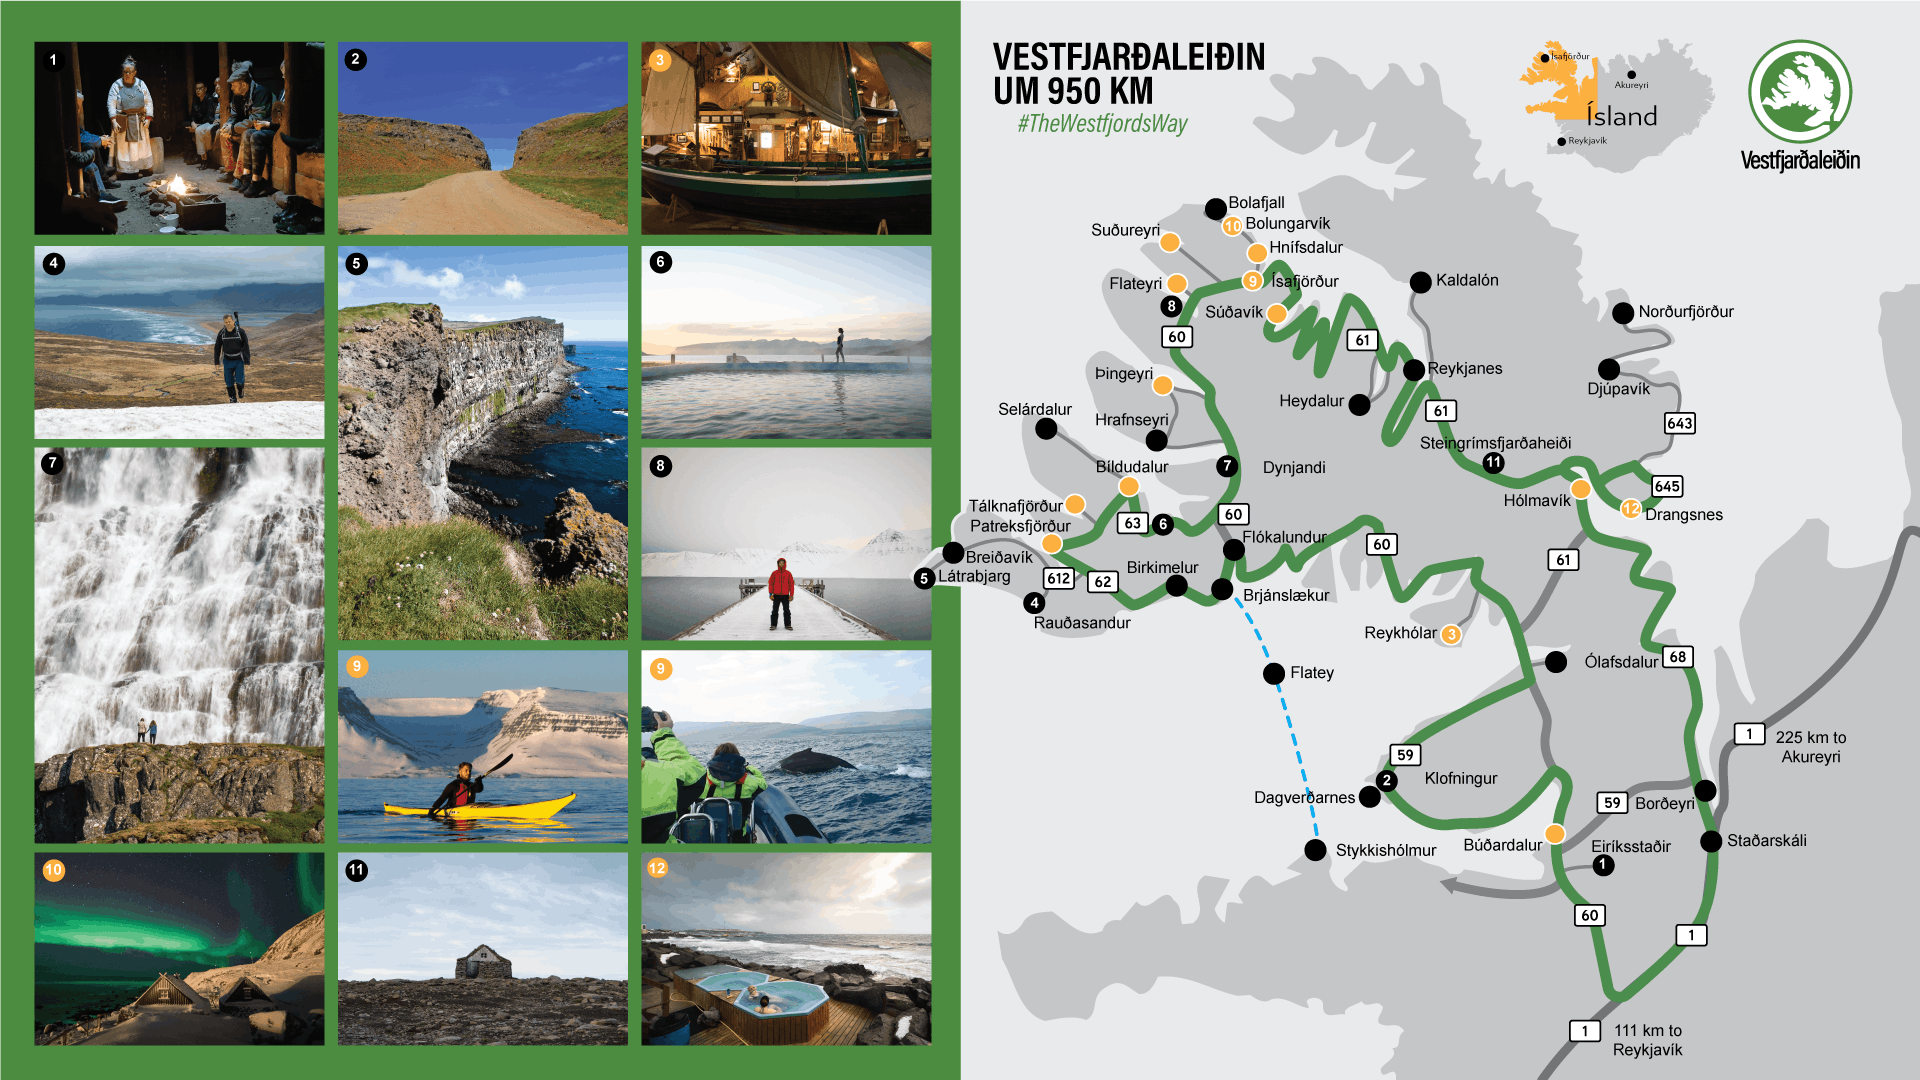 A map of the Westfjords showing The Westfjords Way route and images of scenic stops